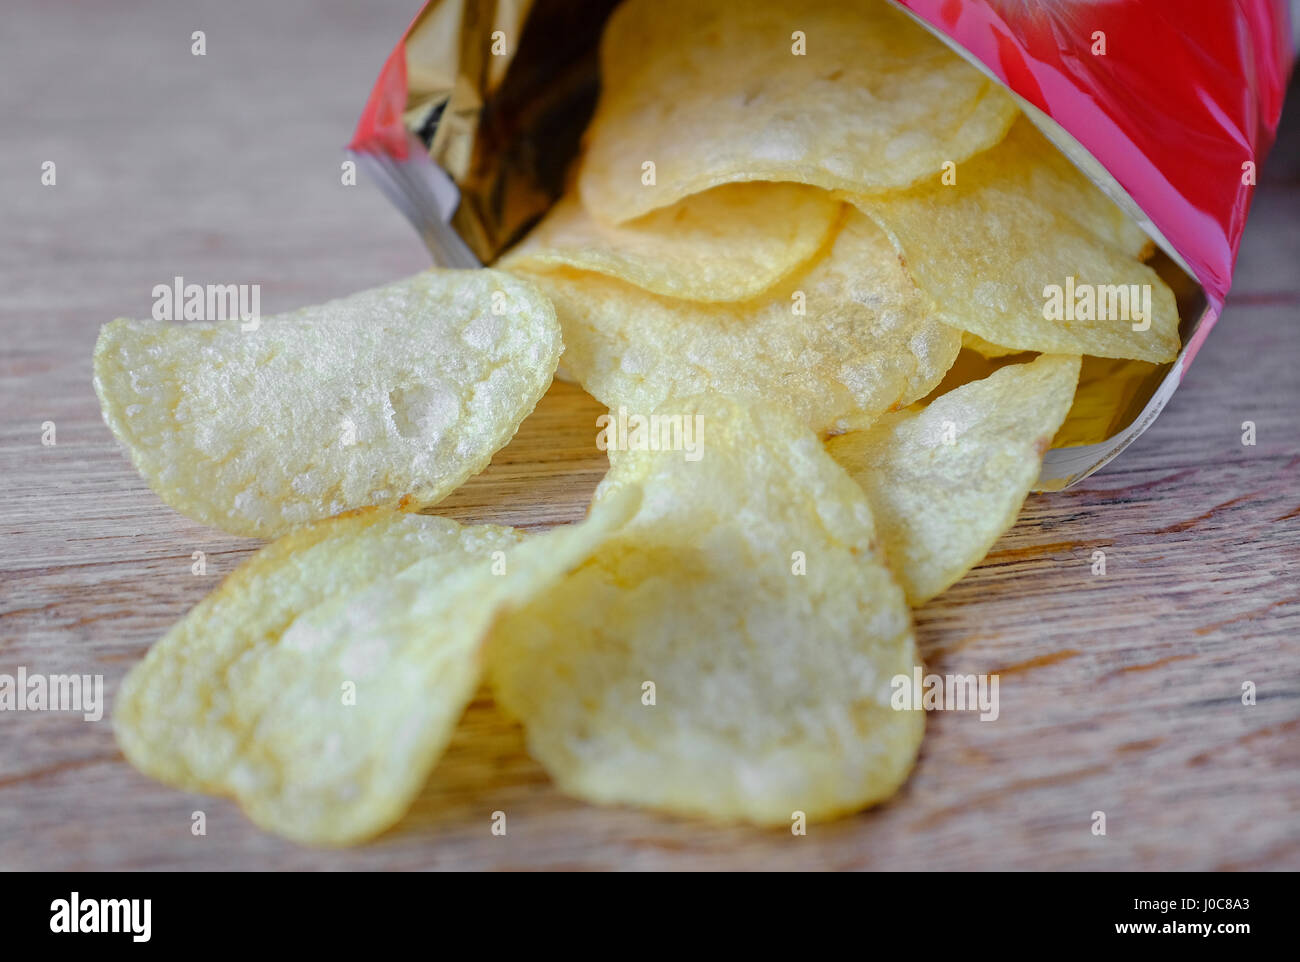 opened bag of potato crisps on wooden table top Stock Photo